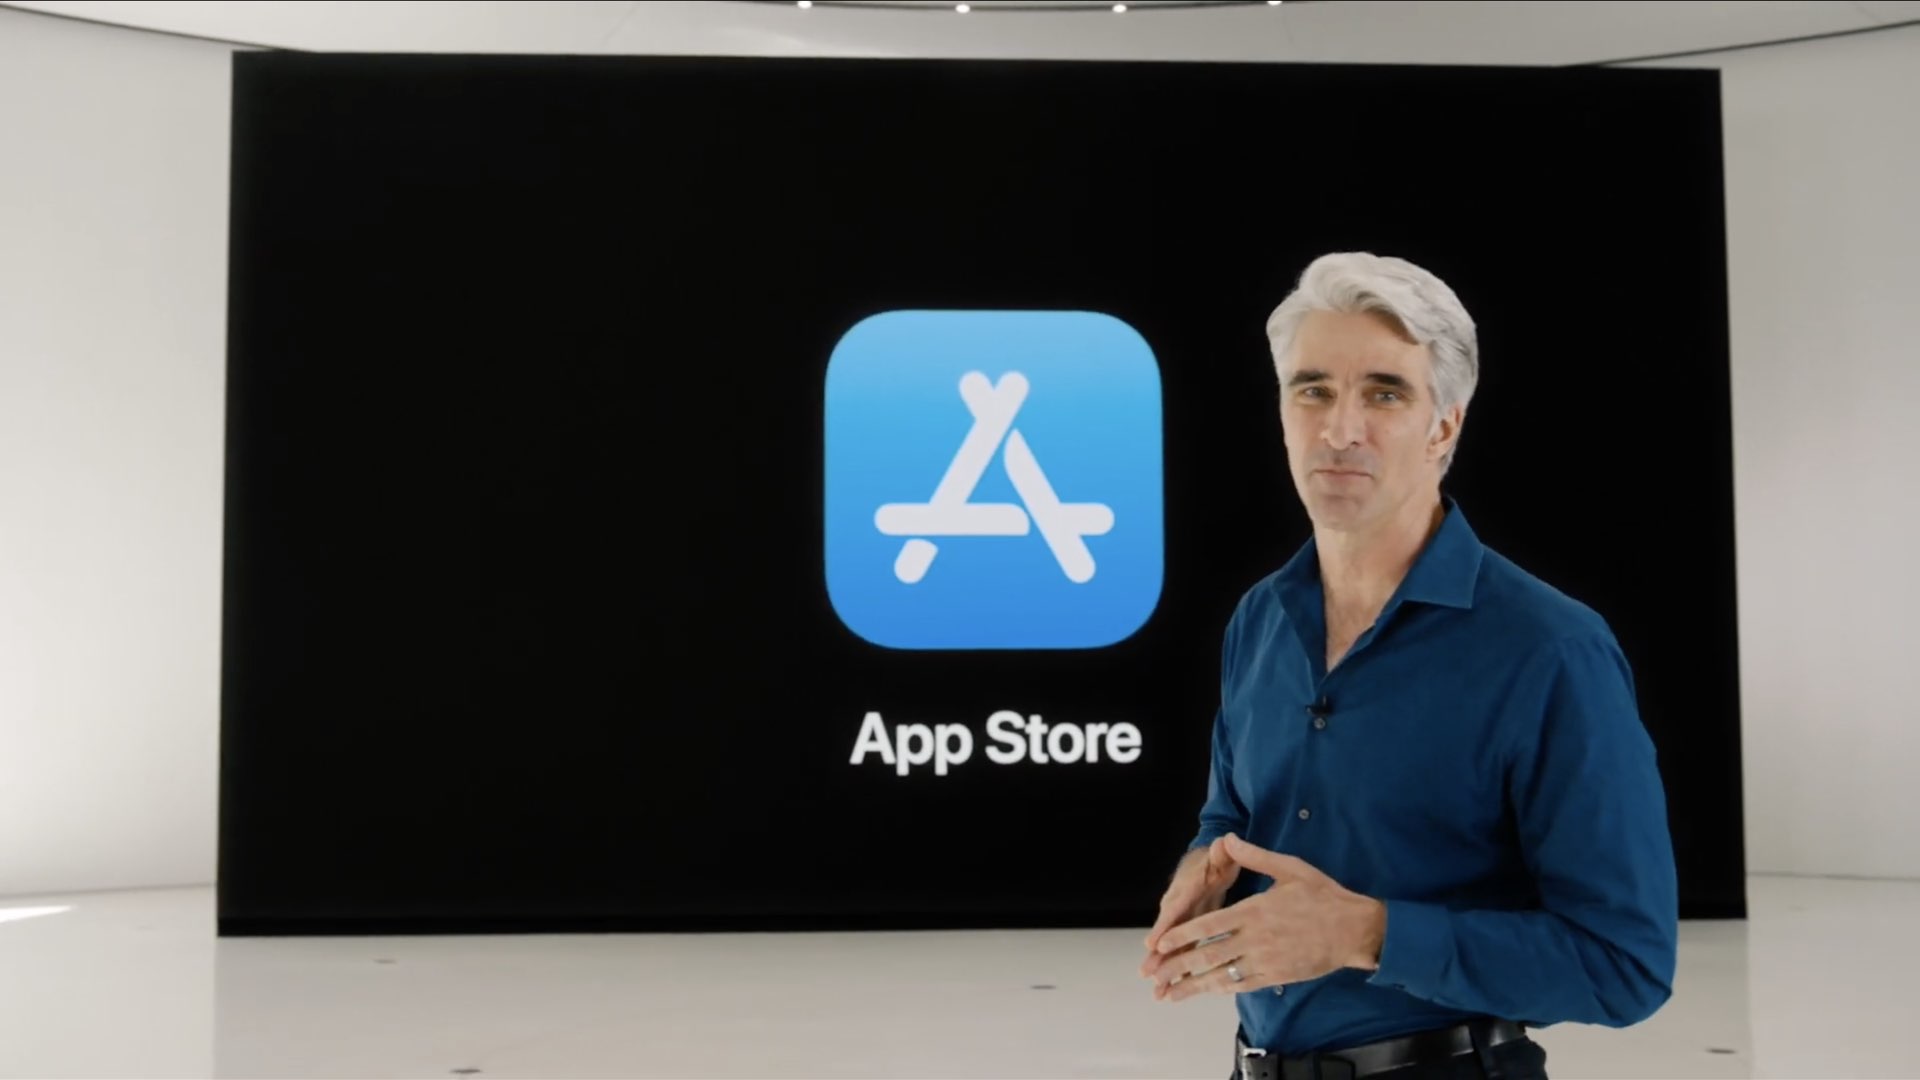 WWDC 2020 slide: Craig Federighi in front of the App Store screen